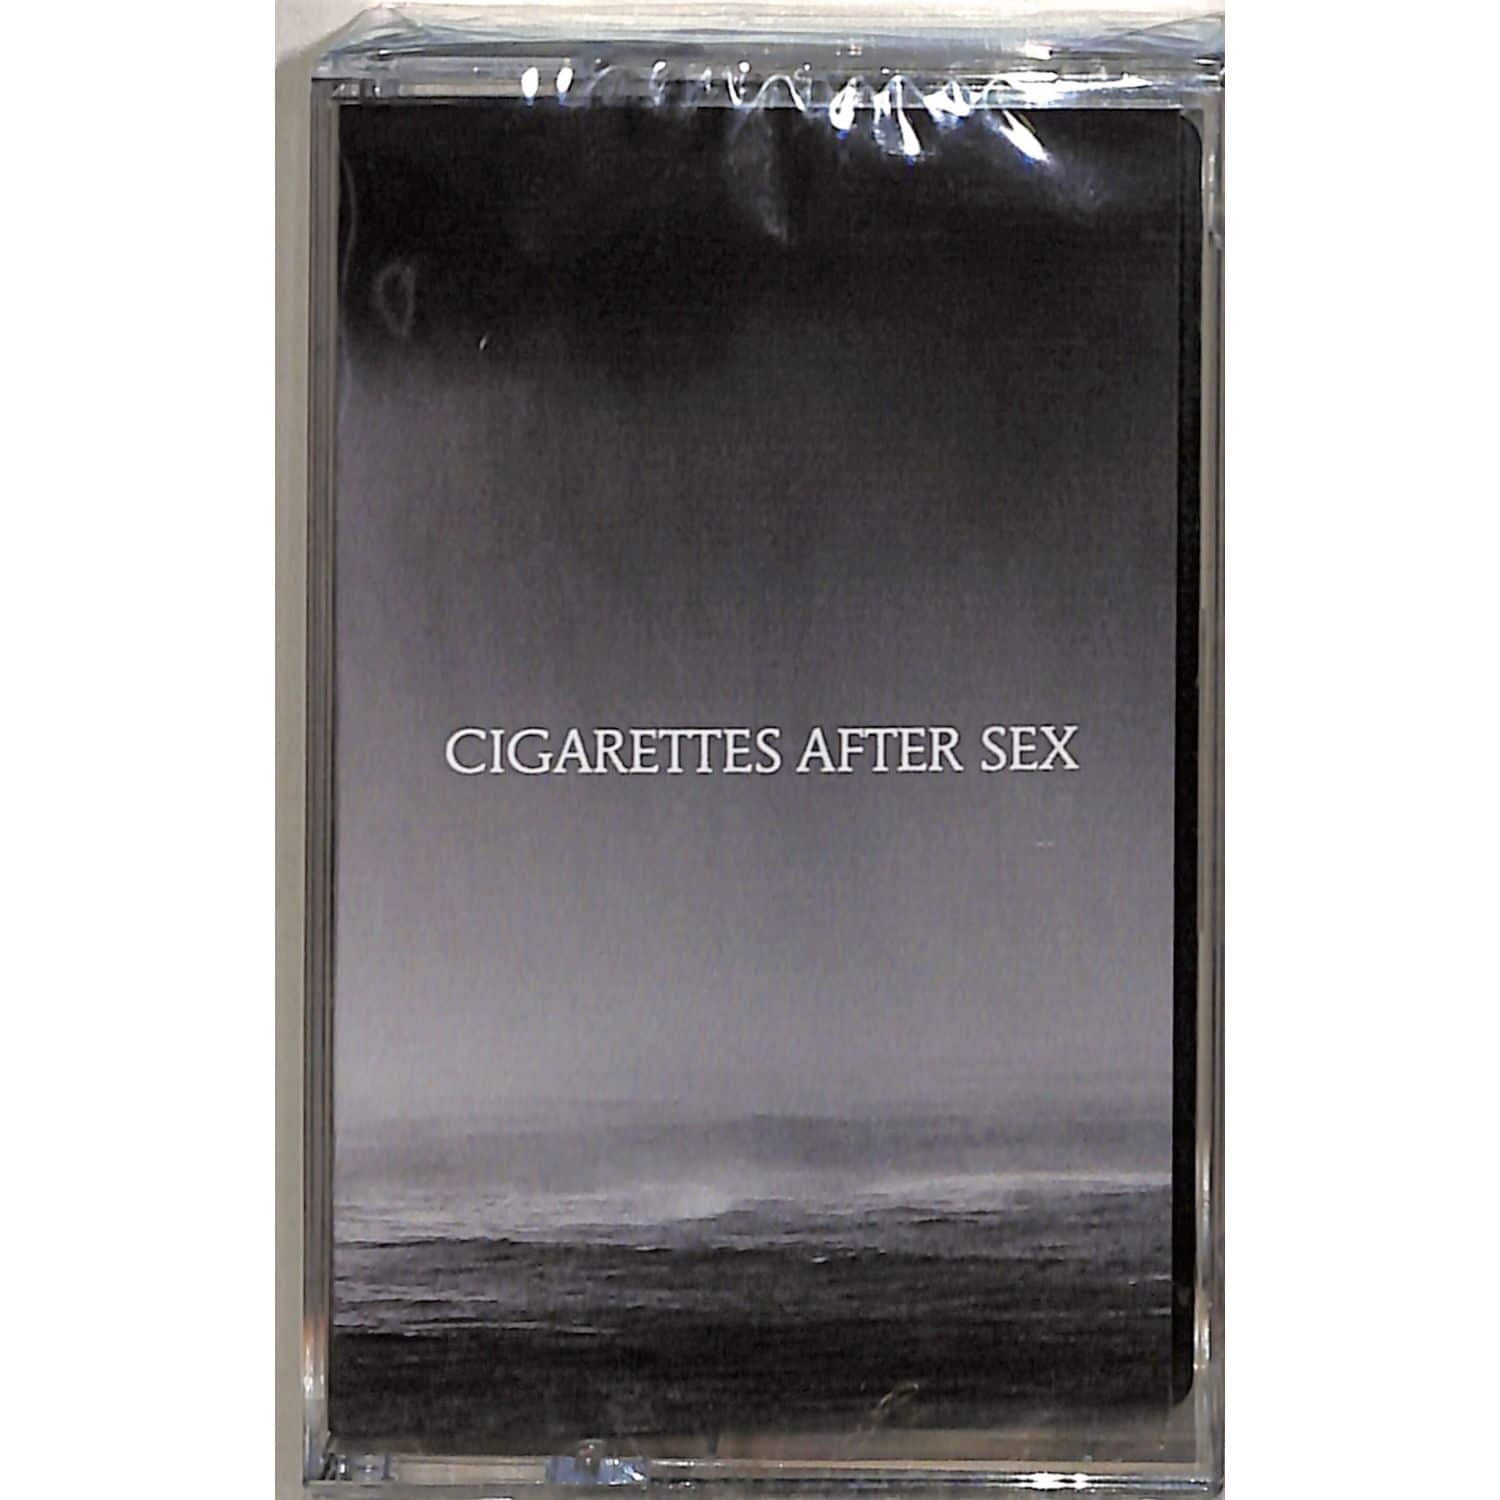 Cigarettes After Sex - CRY 